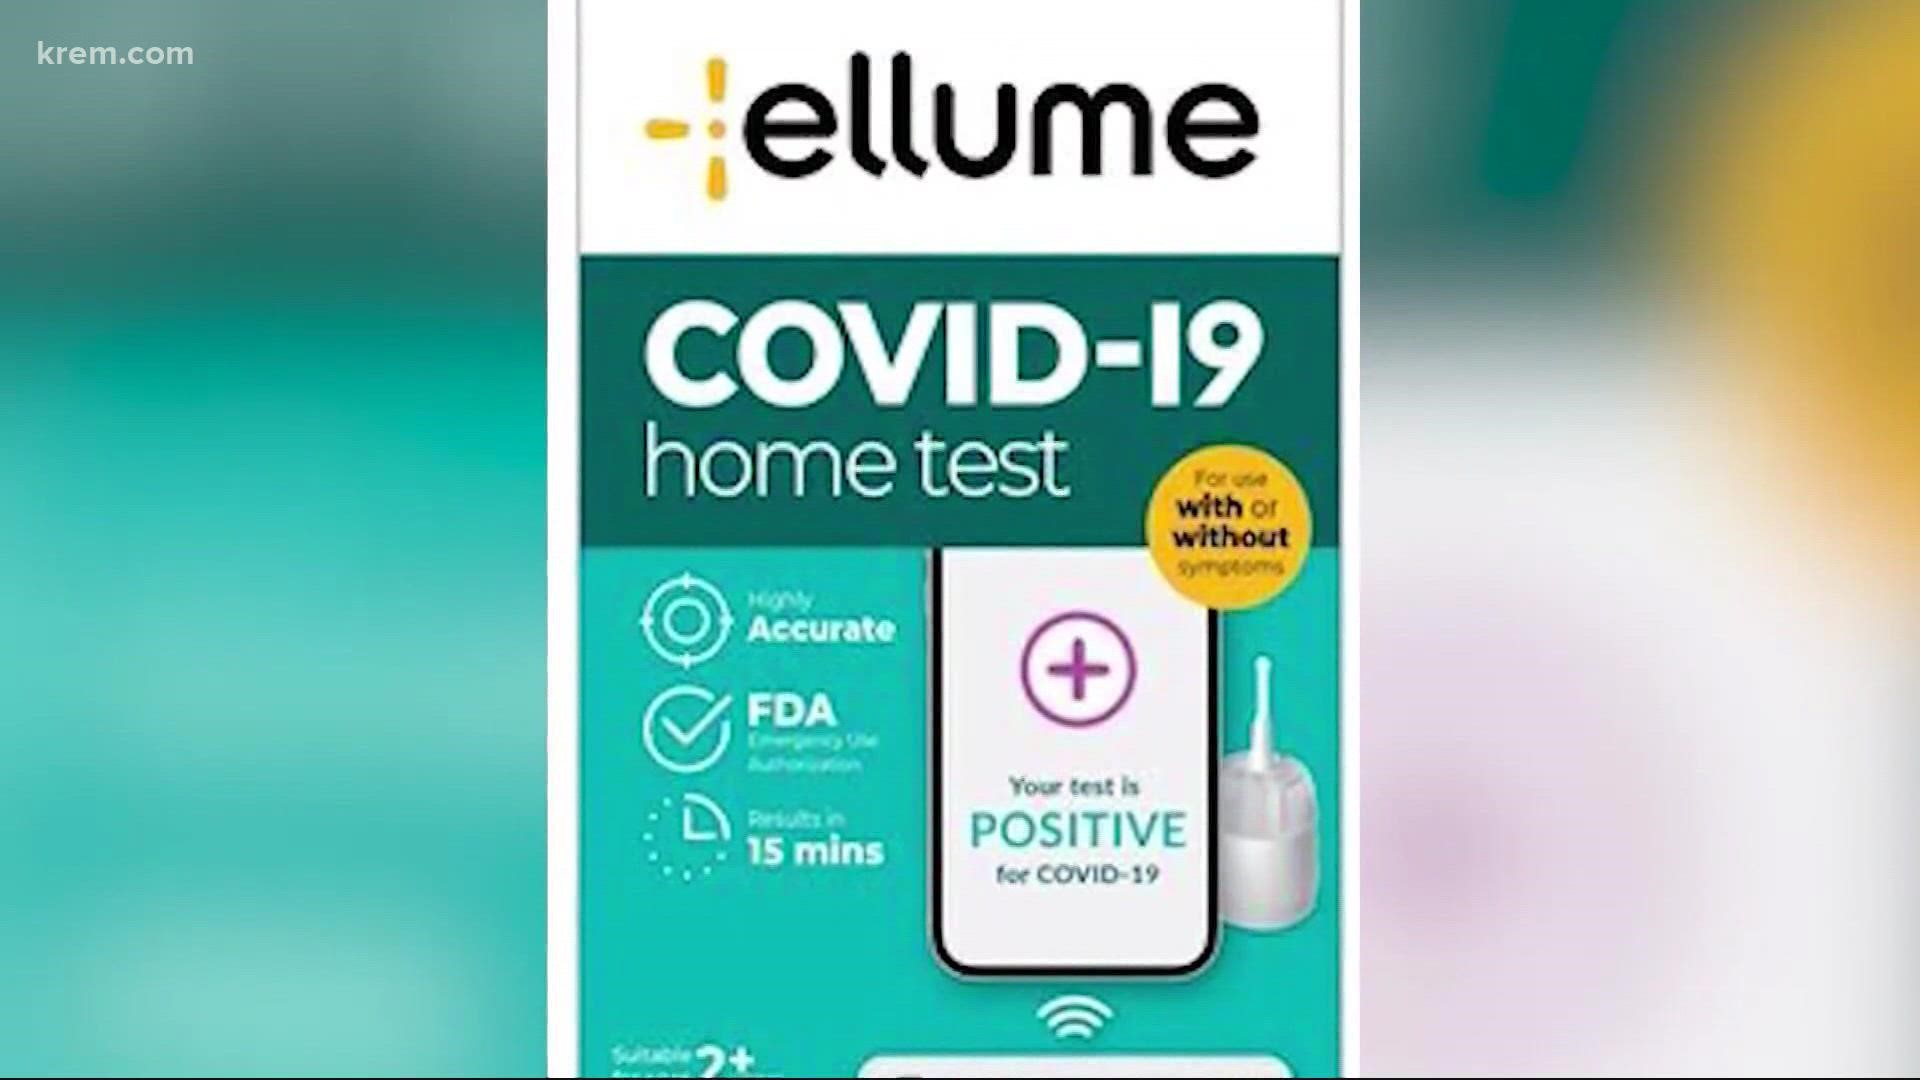 These new at-home test kits provide results in just ten minutes, according to Spokane Regional Health District officials.